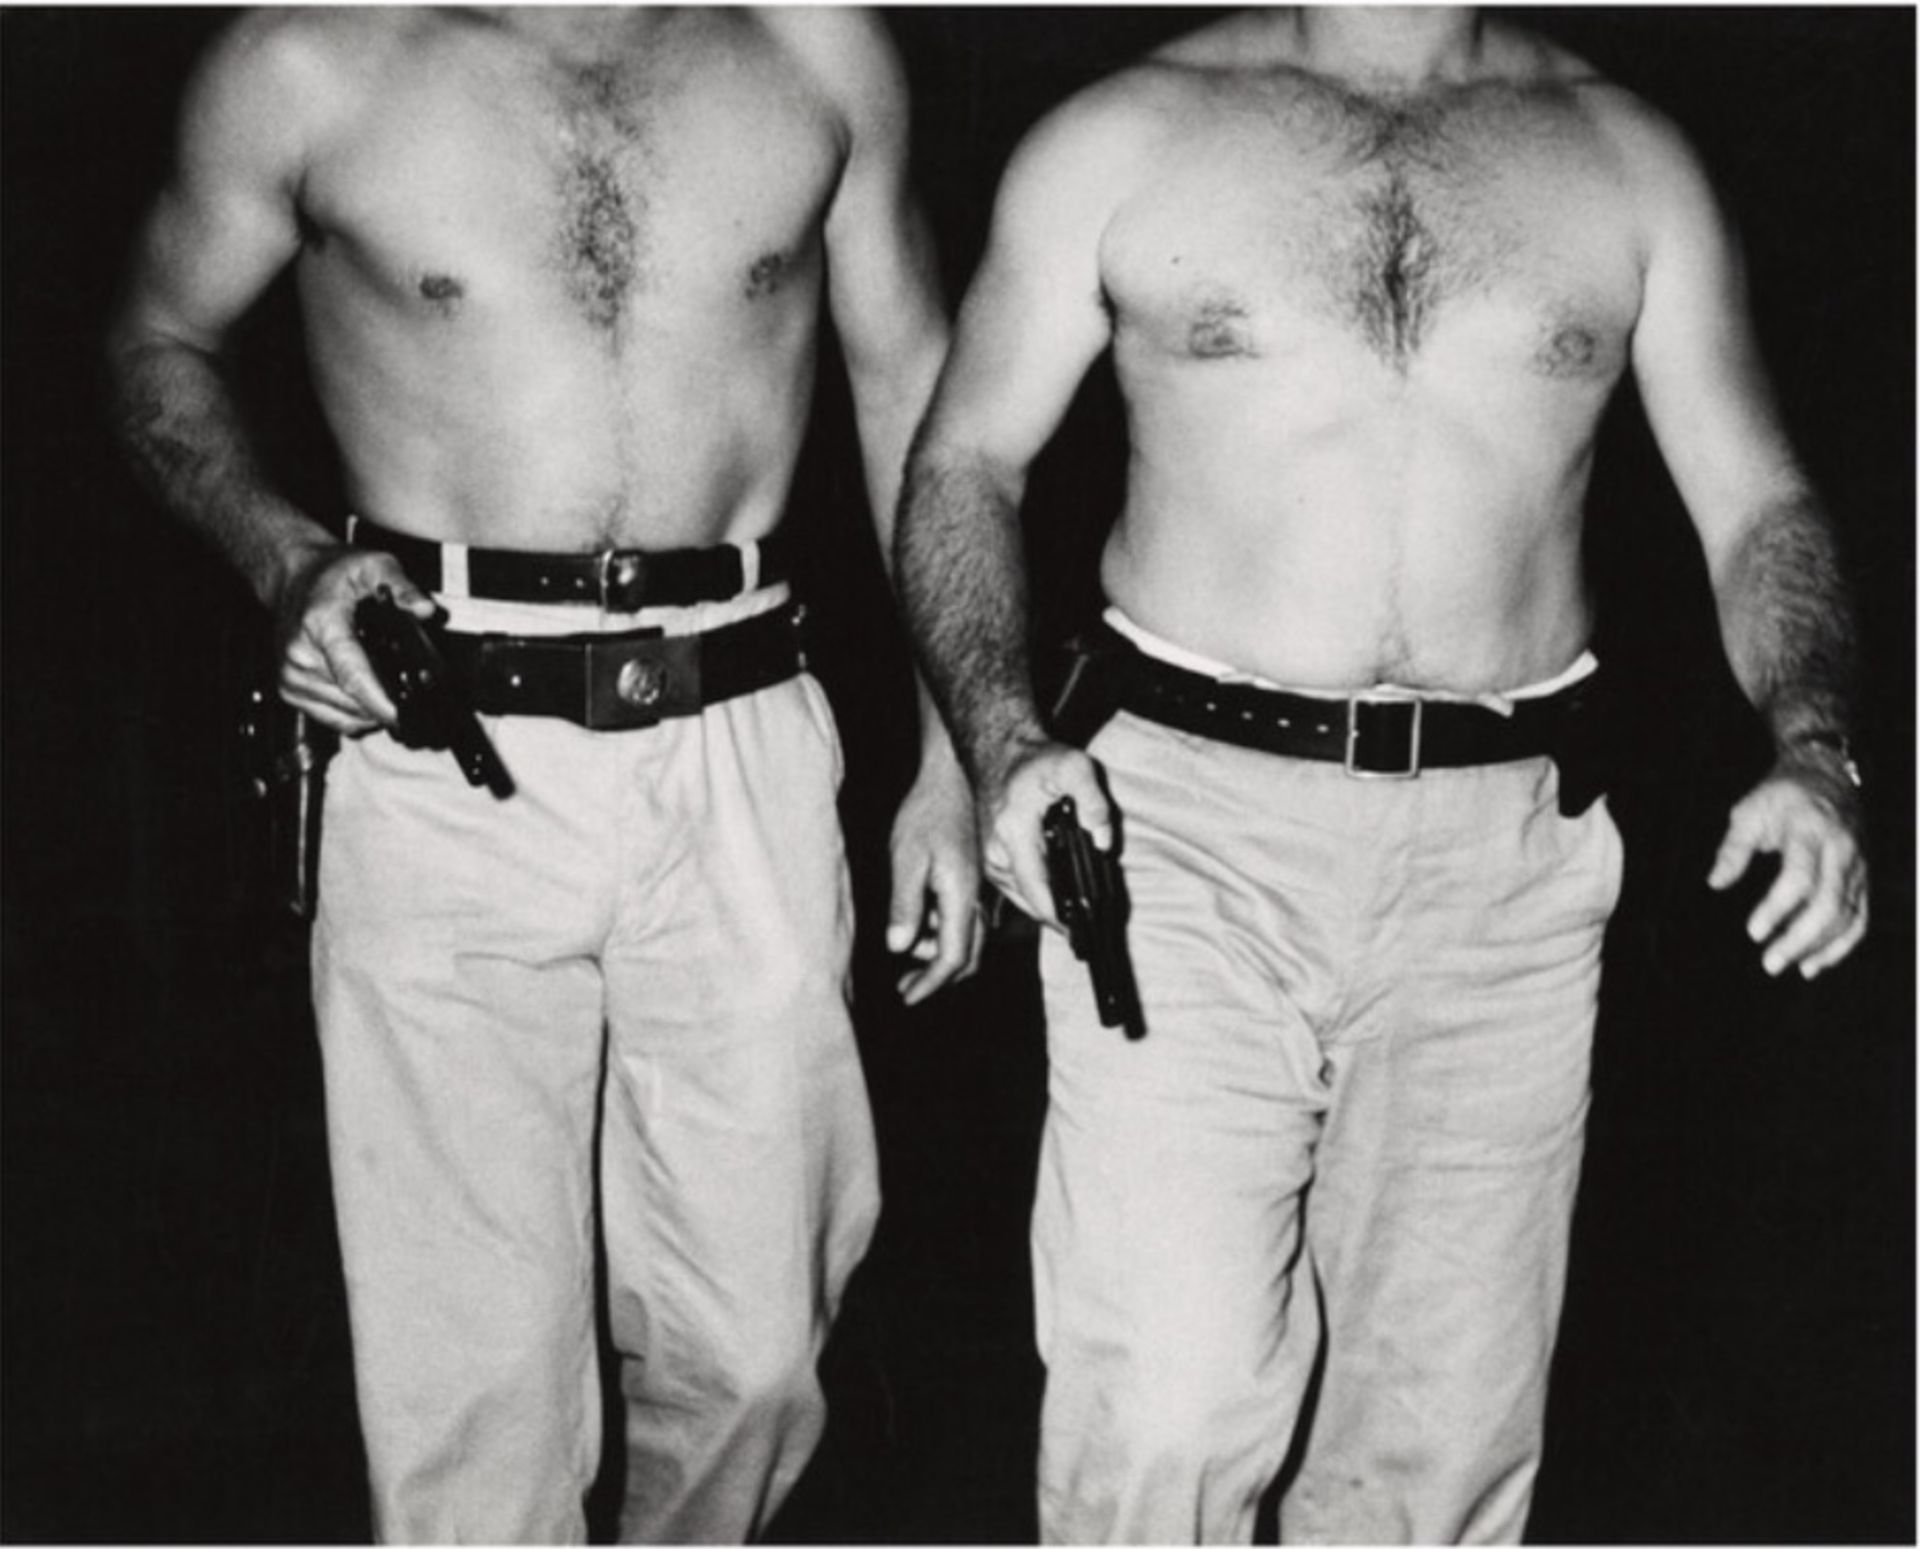 Weegee "Two Police Officers, Hudson River, New York, 1941" Print